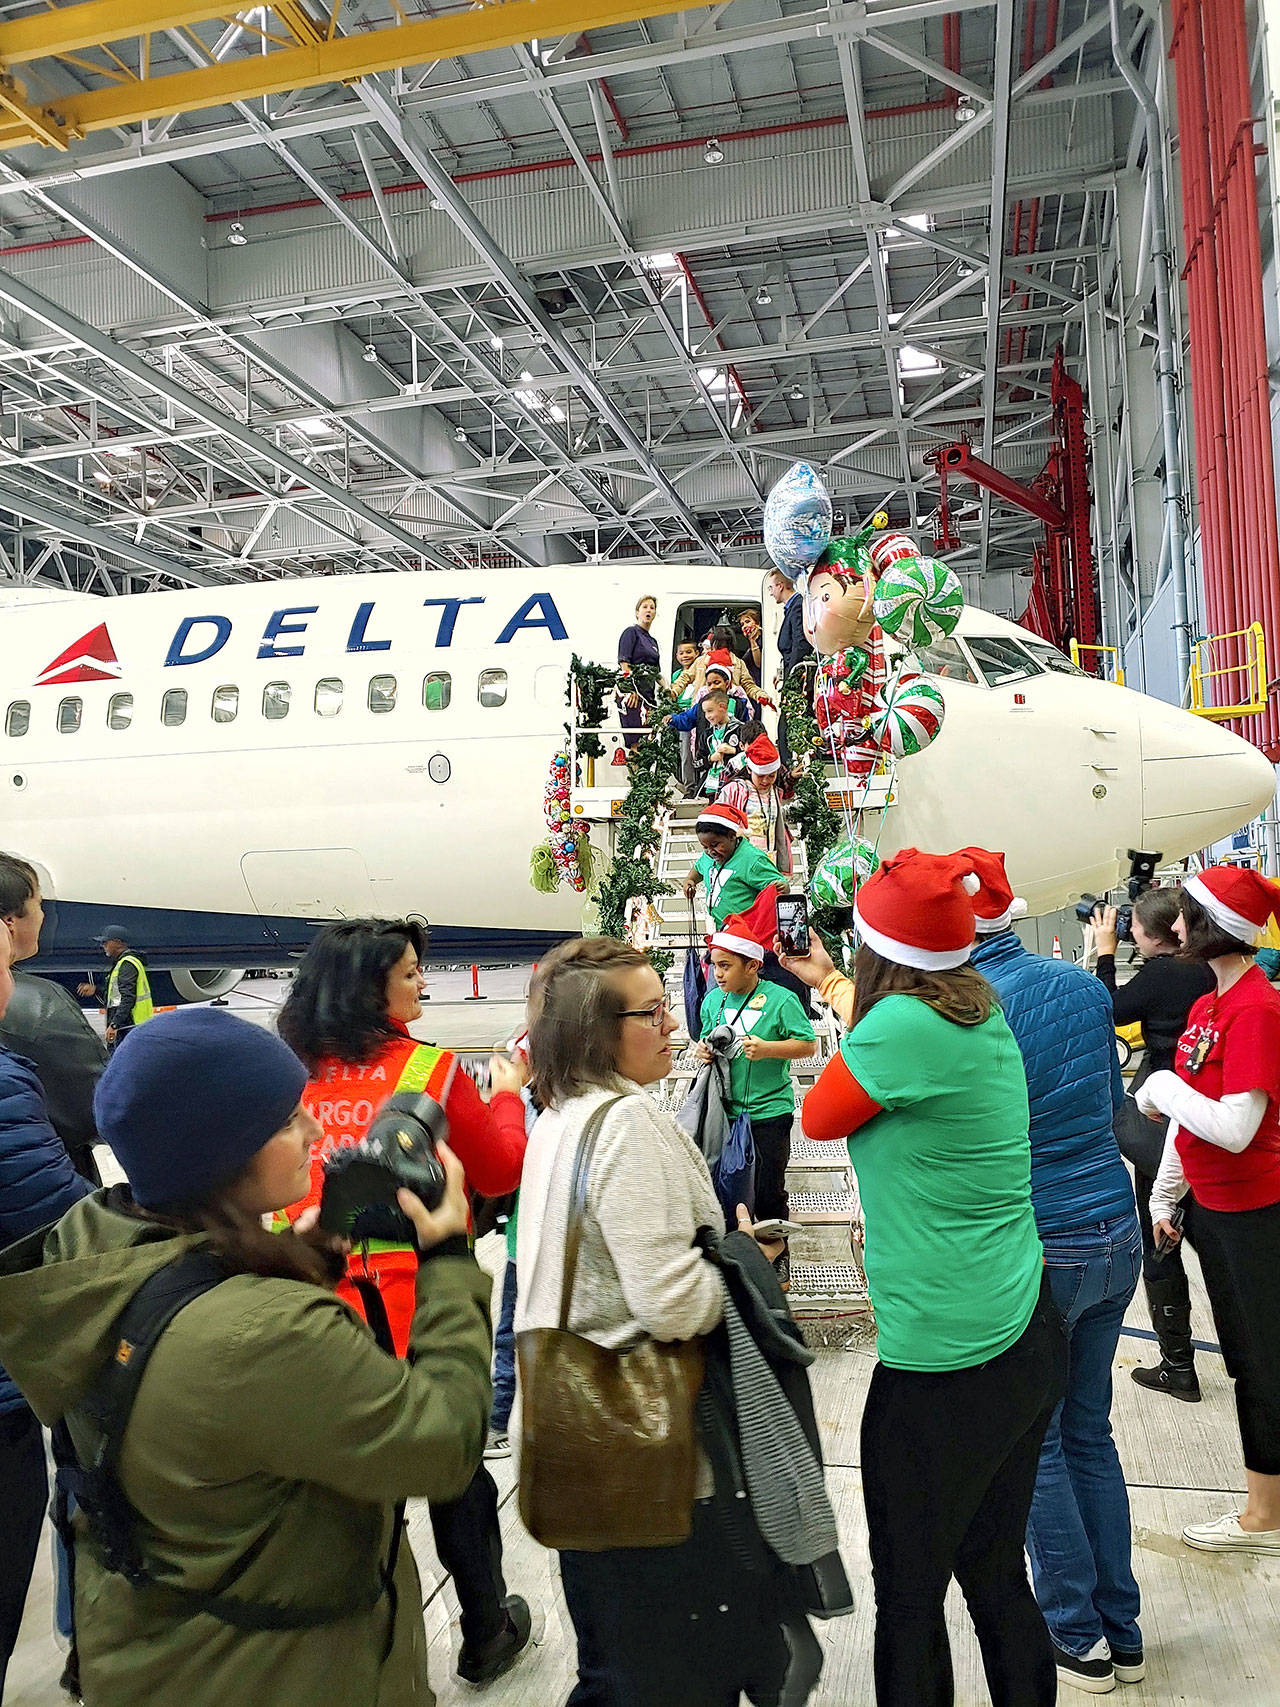 Excited Washington Elementary School second-graders descend into a Delta Air Lines hanger-turned-North Pole at Sea-Tac Airport on Tuesday afternoon, where presents, Santa and Mrs. Claus and all kinds of goodies awaited them, courtesy of Delta Air Lines and the Seattle YMCA. COURTESY PHOTO